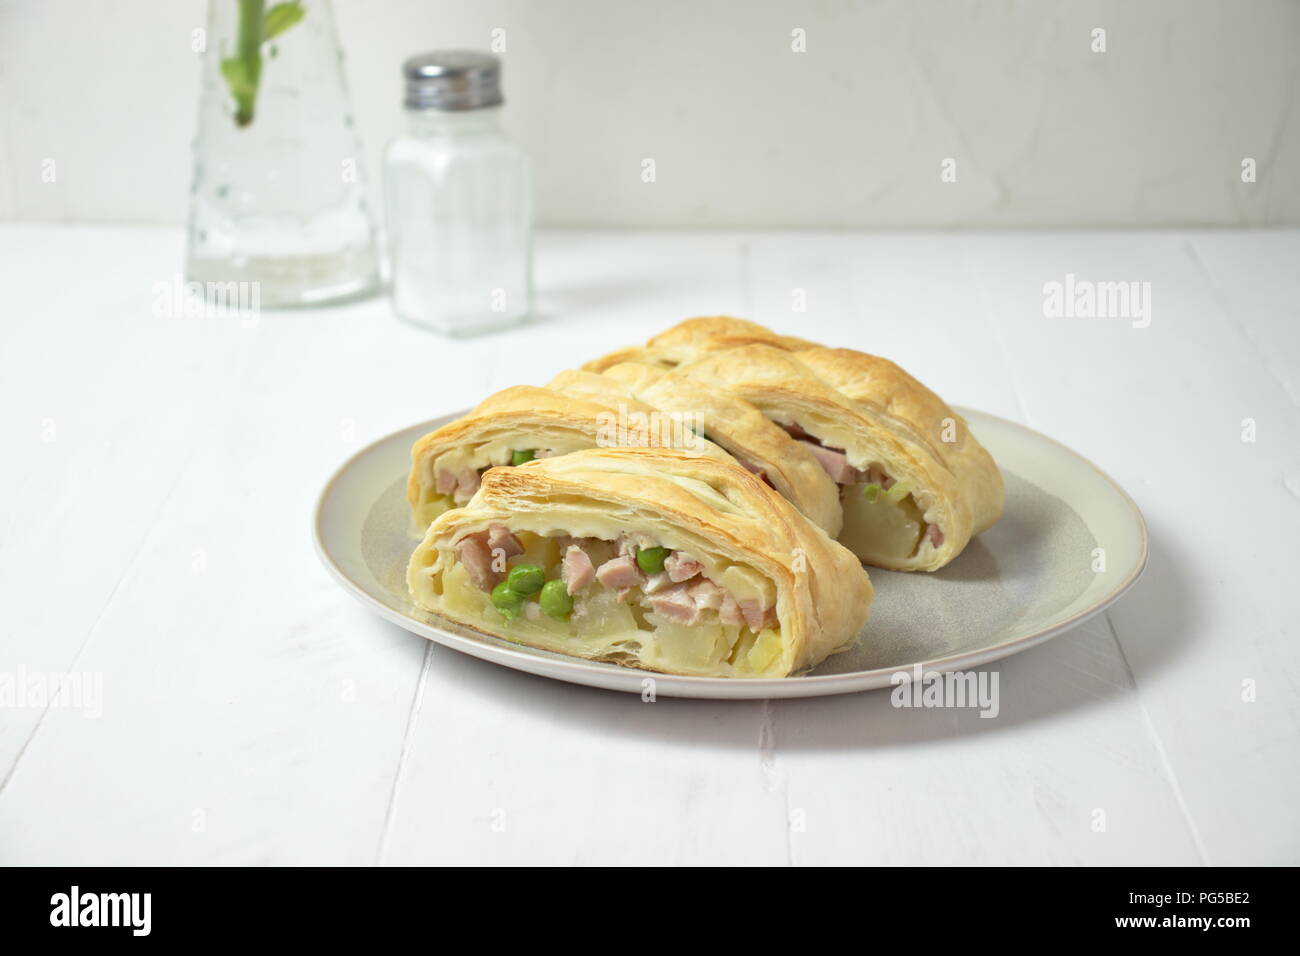 Salty braid made of puff pastry filled with potatoes, ham and peas Stock Photo